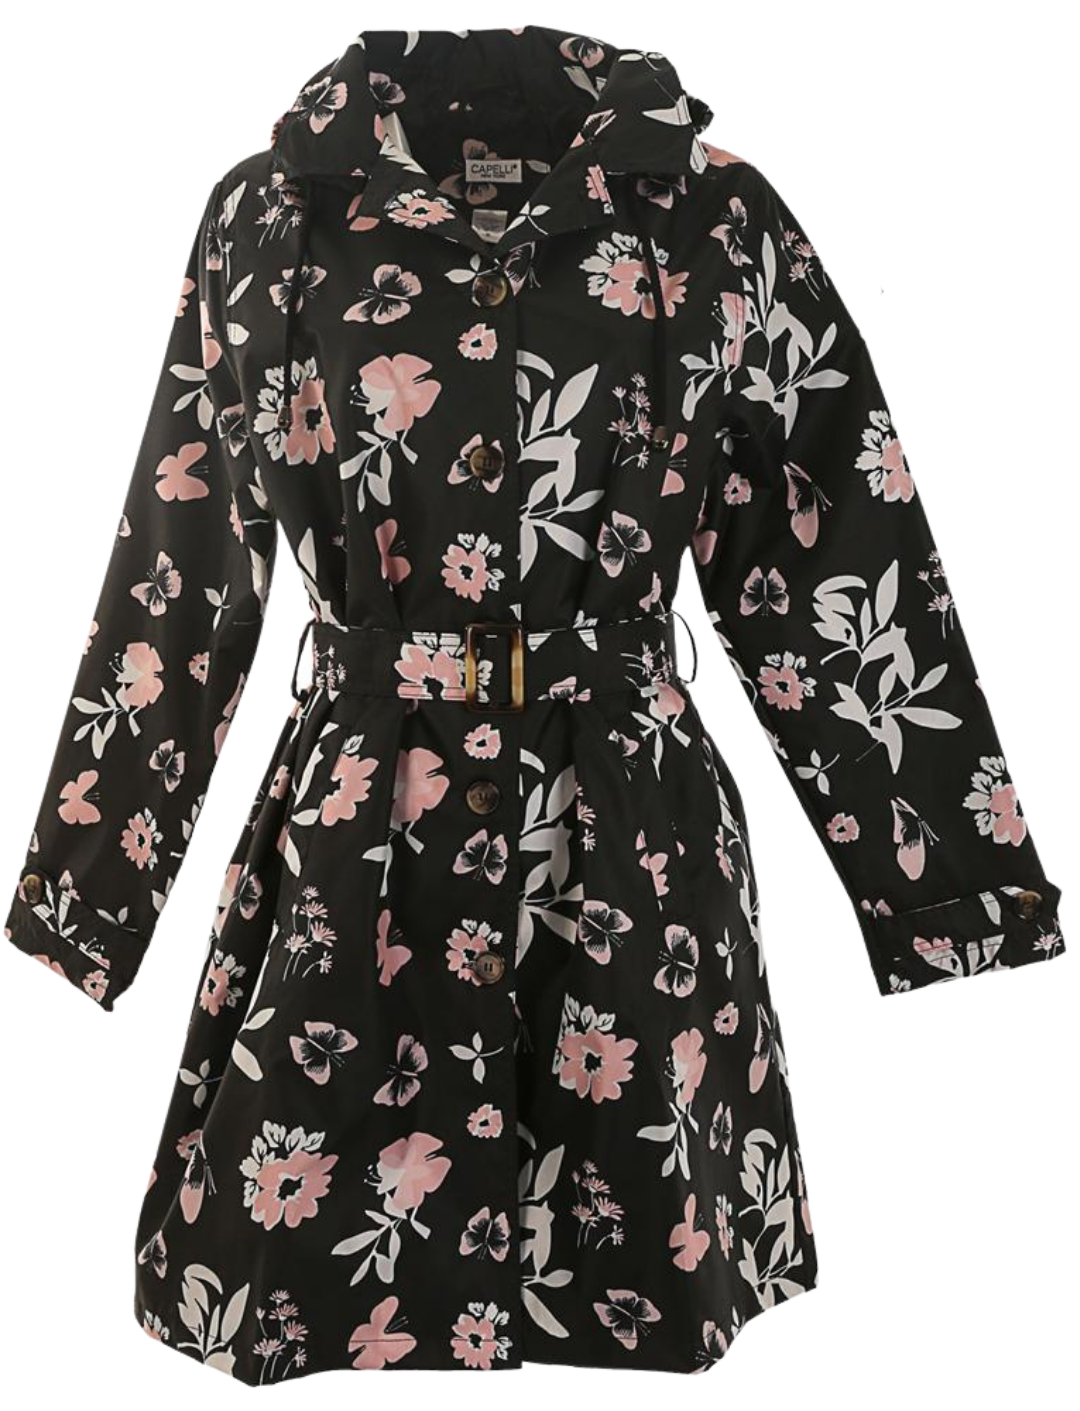 Ladies Butterfly Floral Printed Mid-Length Basic Rain Coat with 